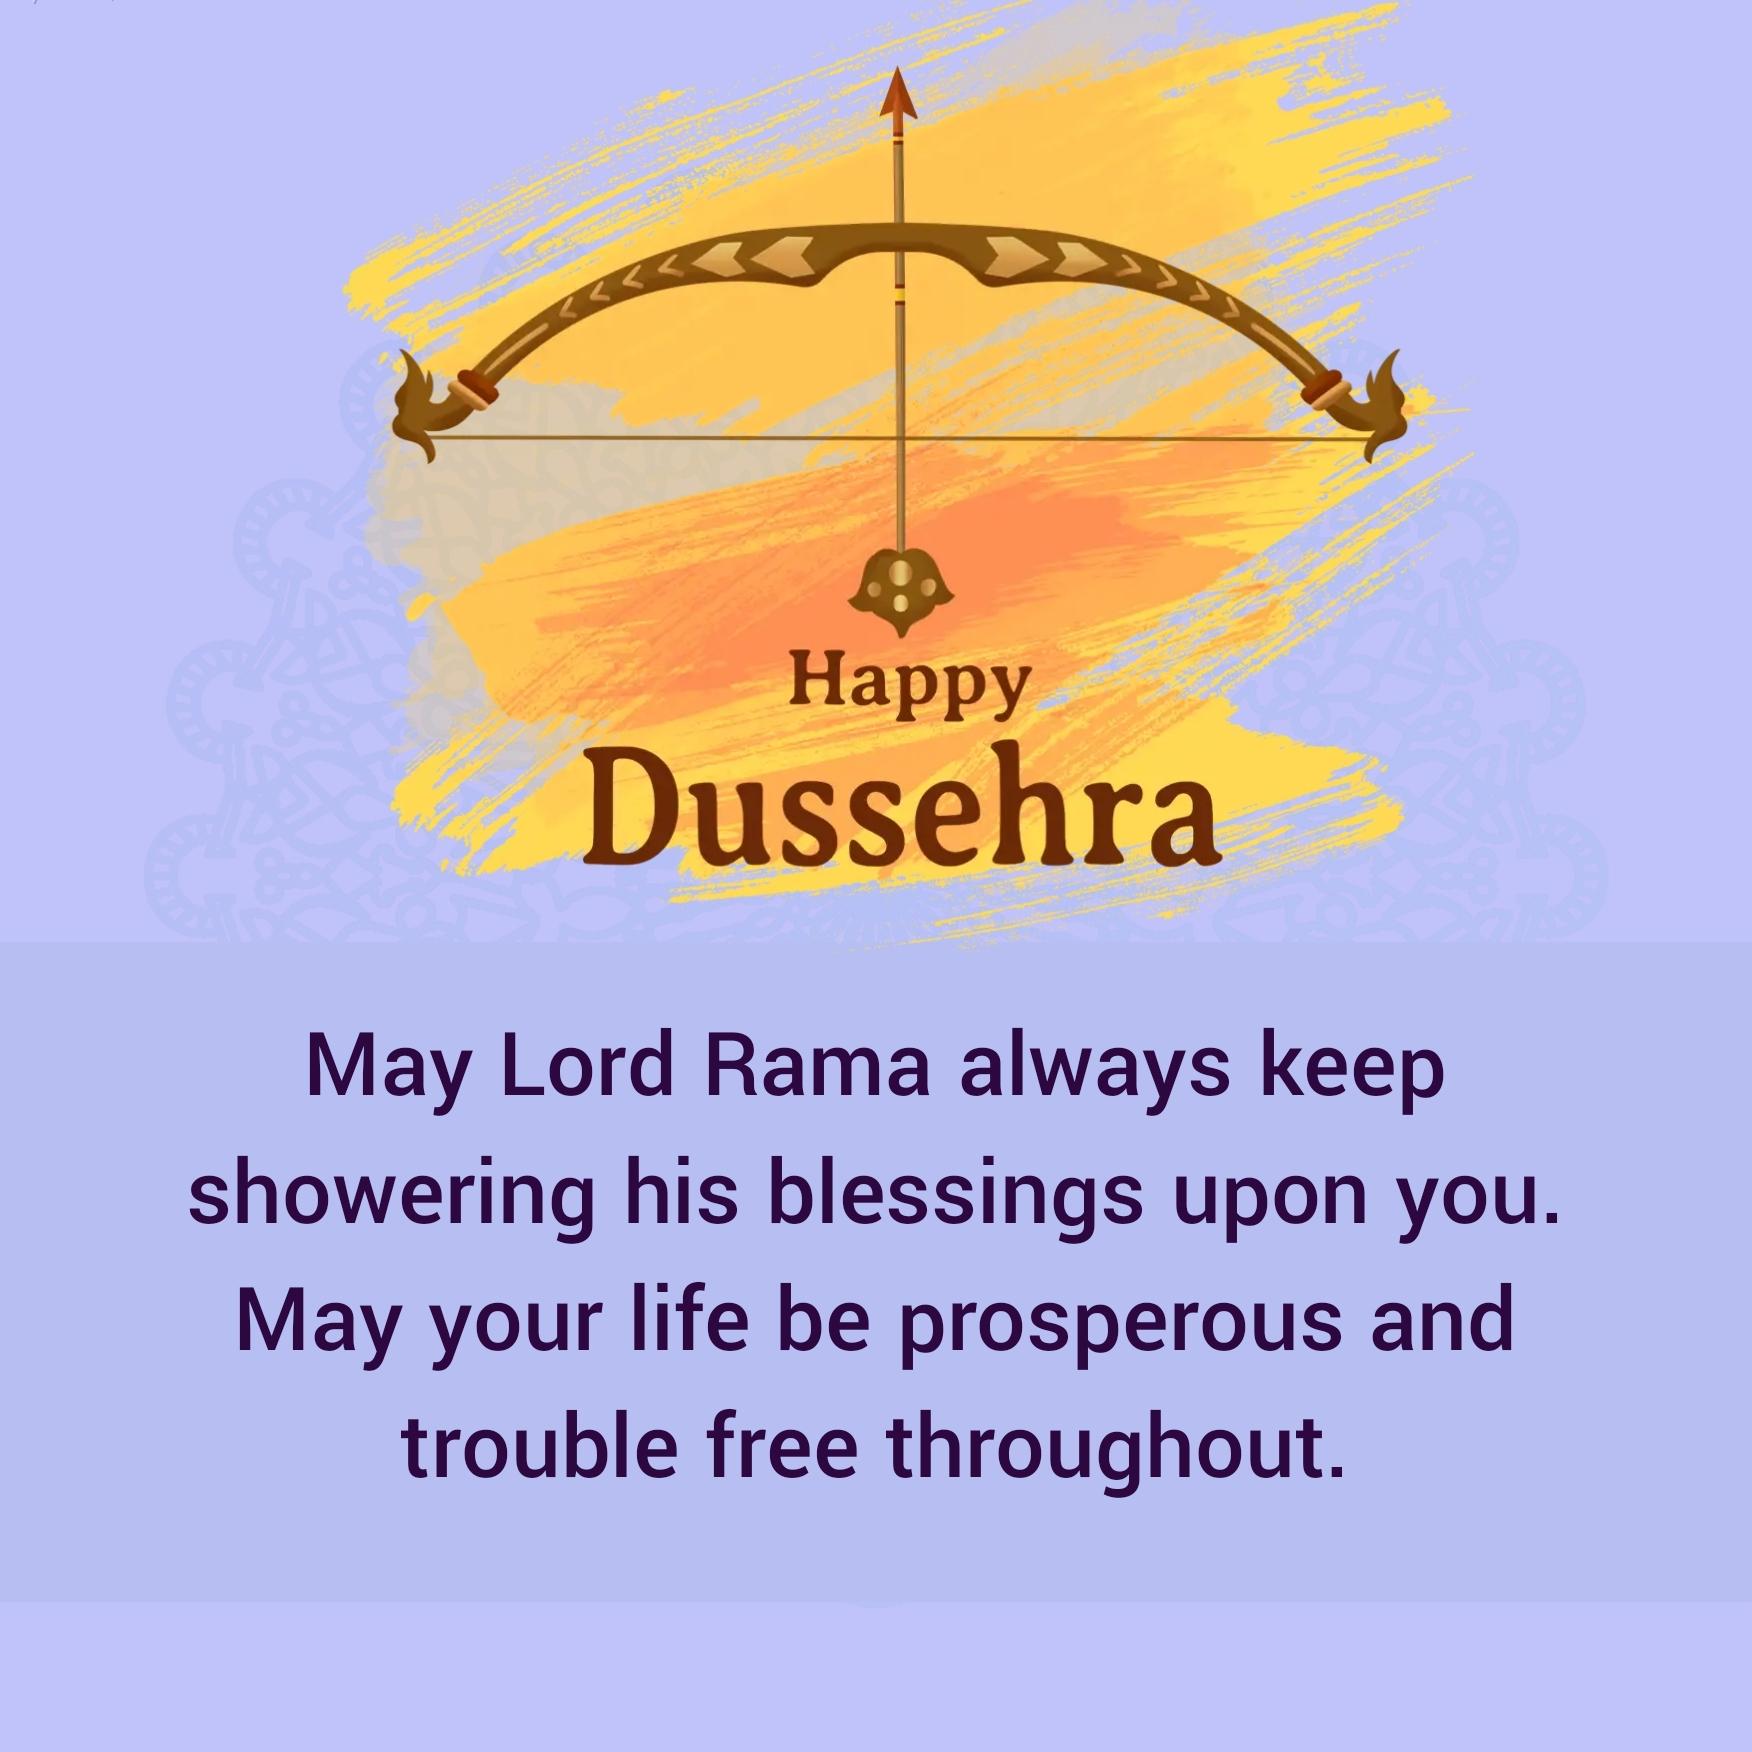 May Lord Rama always keep showering his blessings upon you